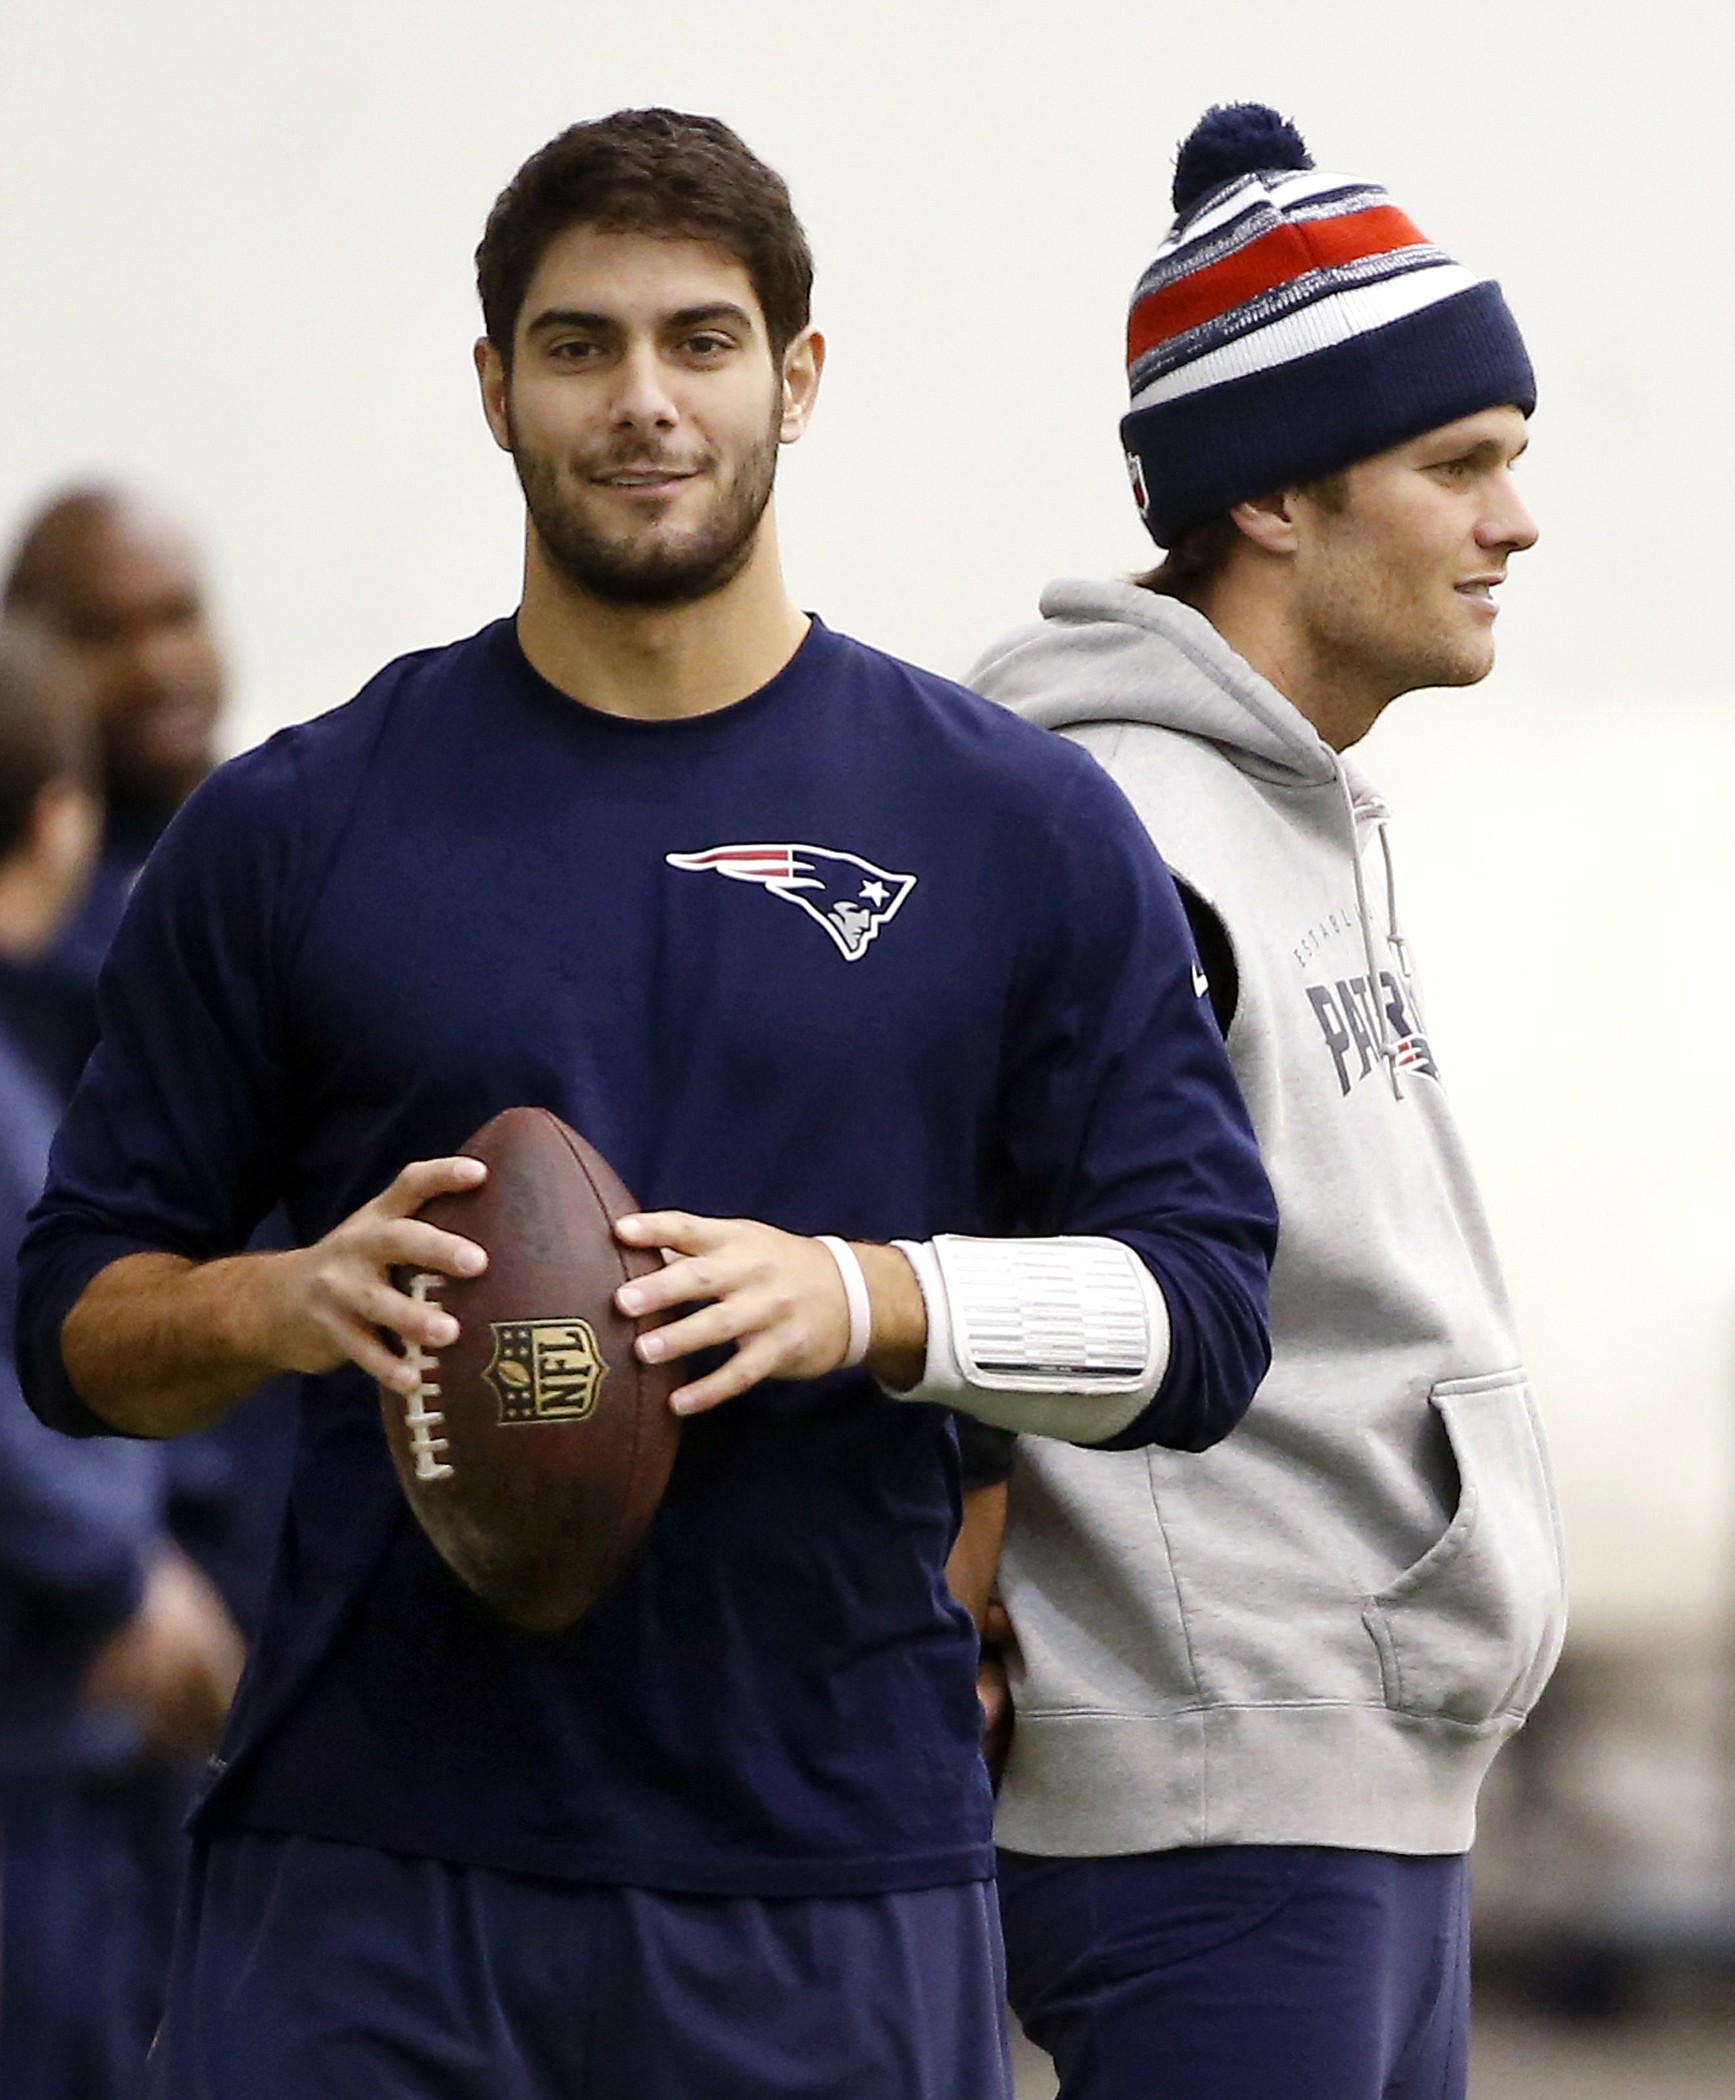 New England Patriots backup quarterback Jimmy Garoppolo, left, holds a football as starting quarterback Tom Brady, right, stands by during a walkthrough at the NFL football team's facility in Foxborough, Mass., in January.